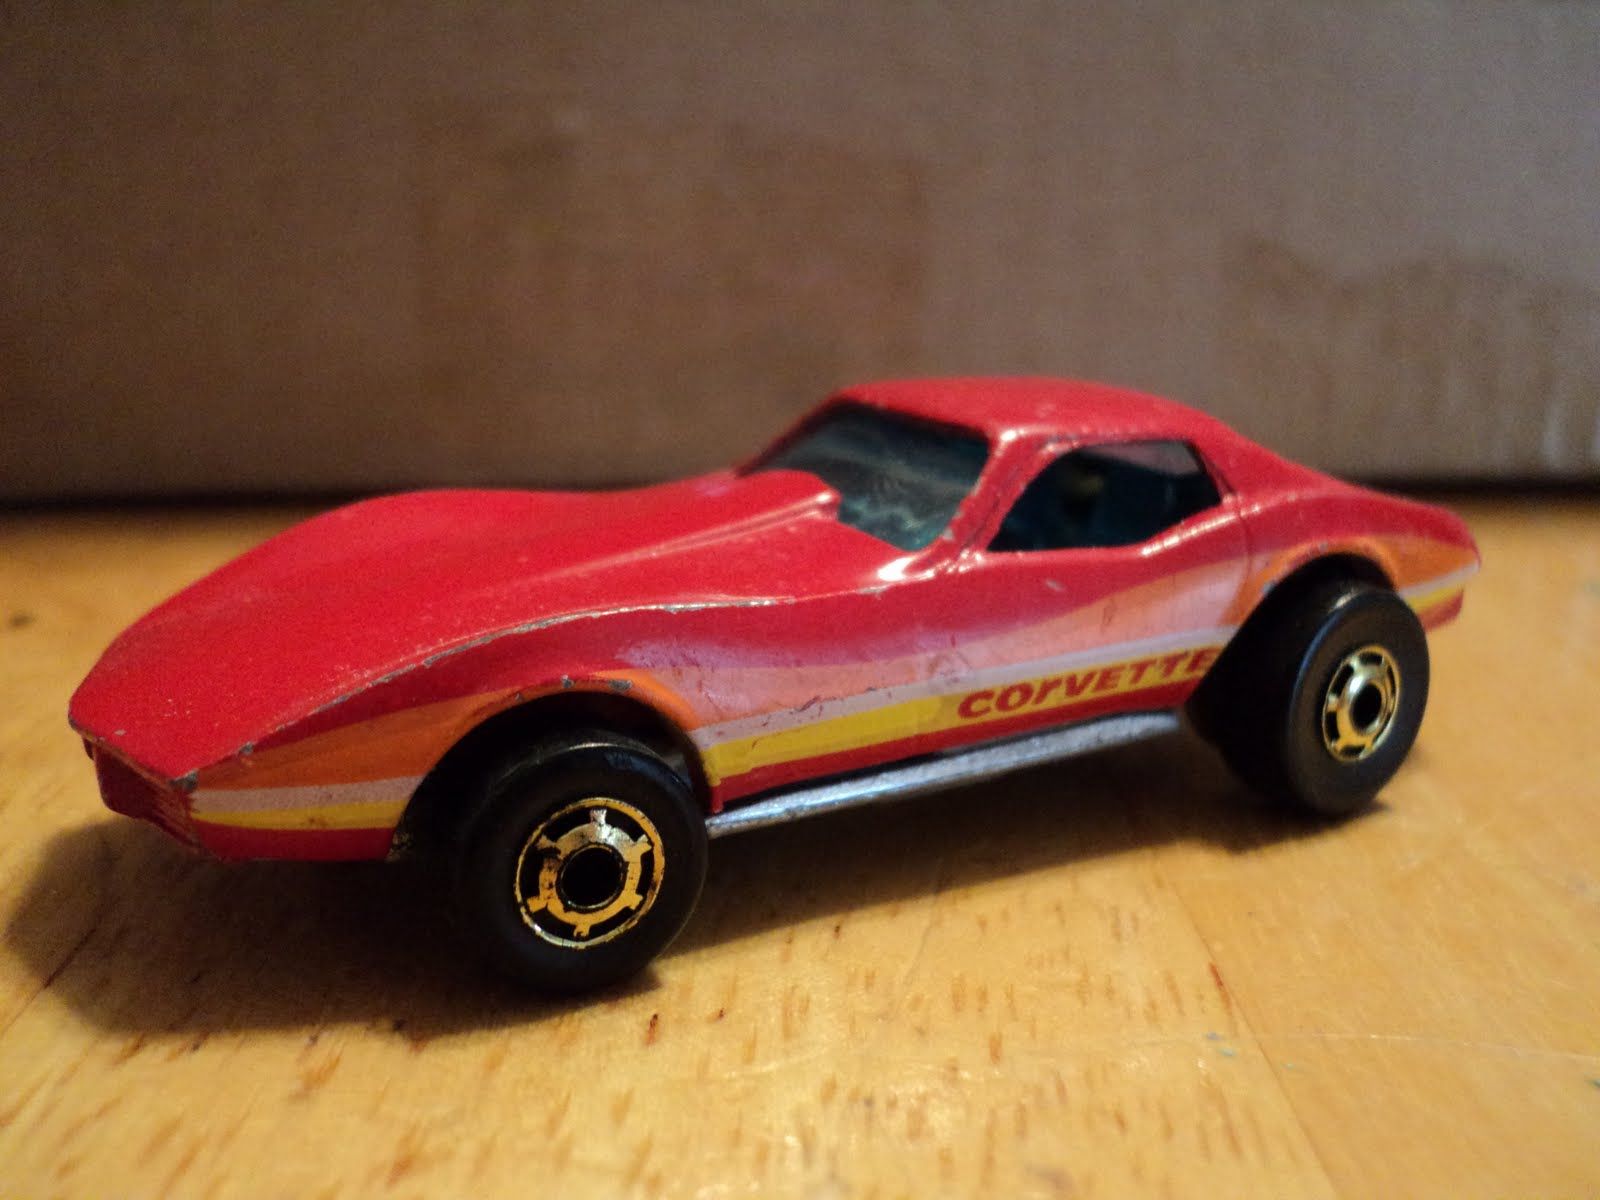 The 15 Worst Hot Wheels Cars Of All Time (And The 15 Best)